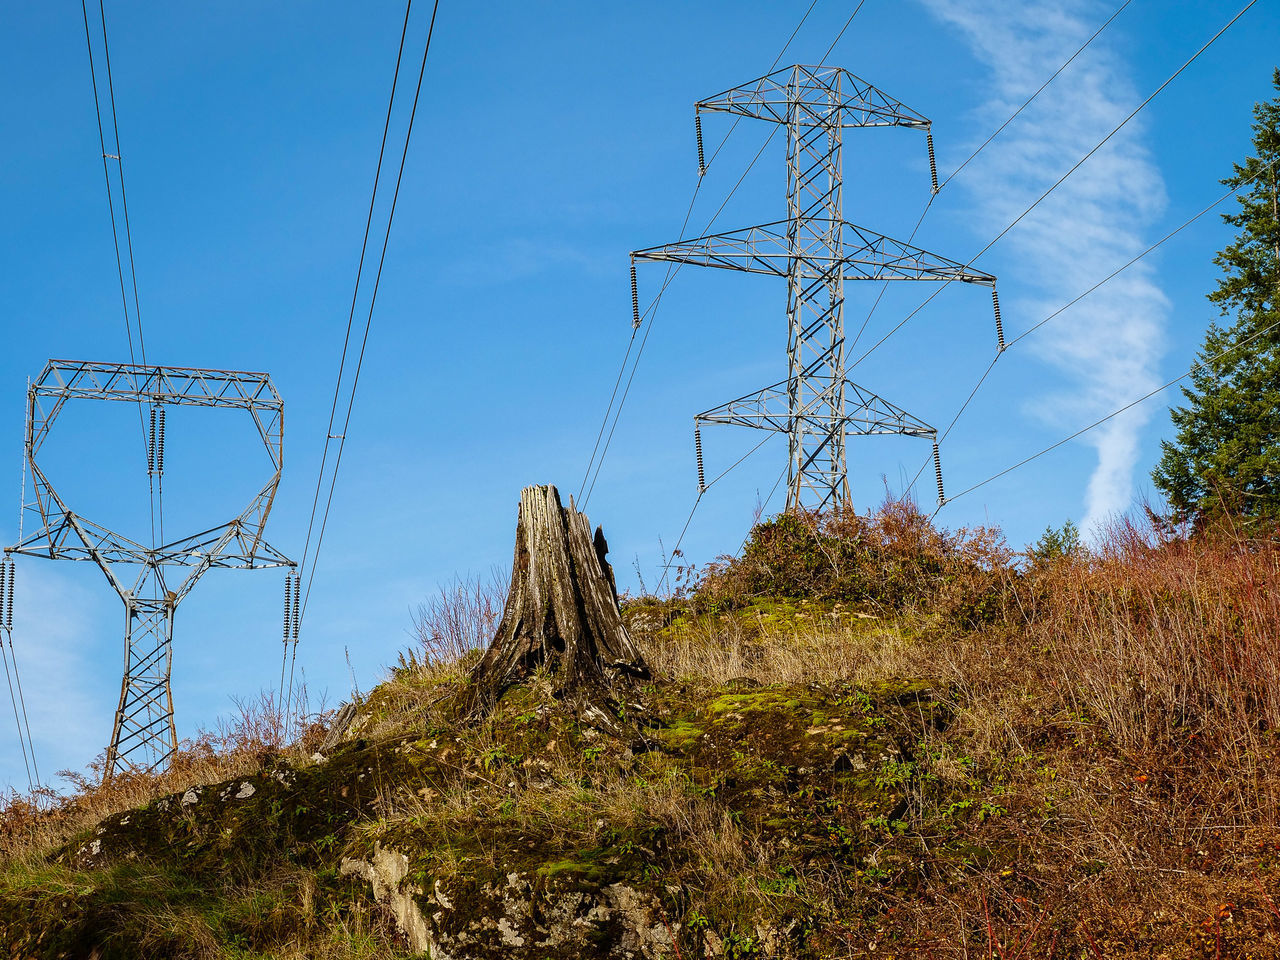 LOW ANGLE VIEW OF ELECTRICITY PYLON ON FIELD